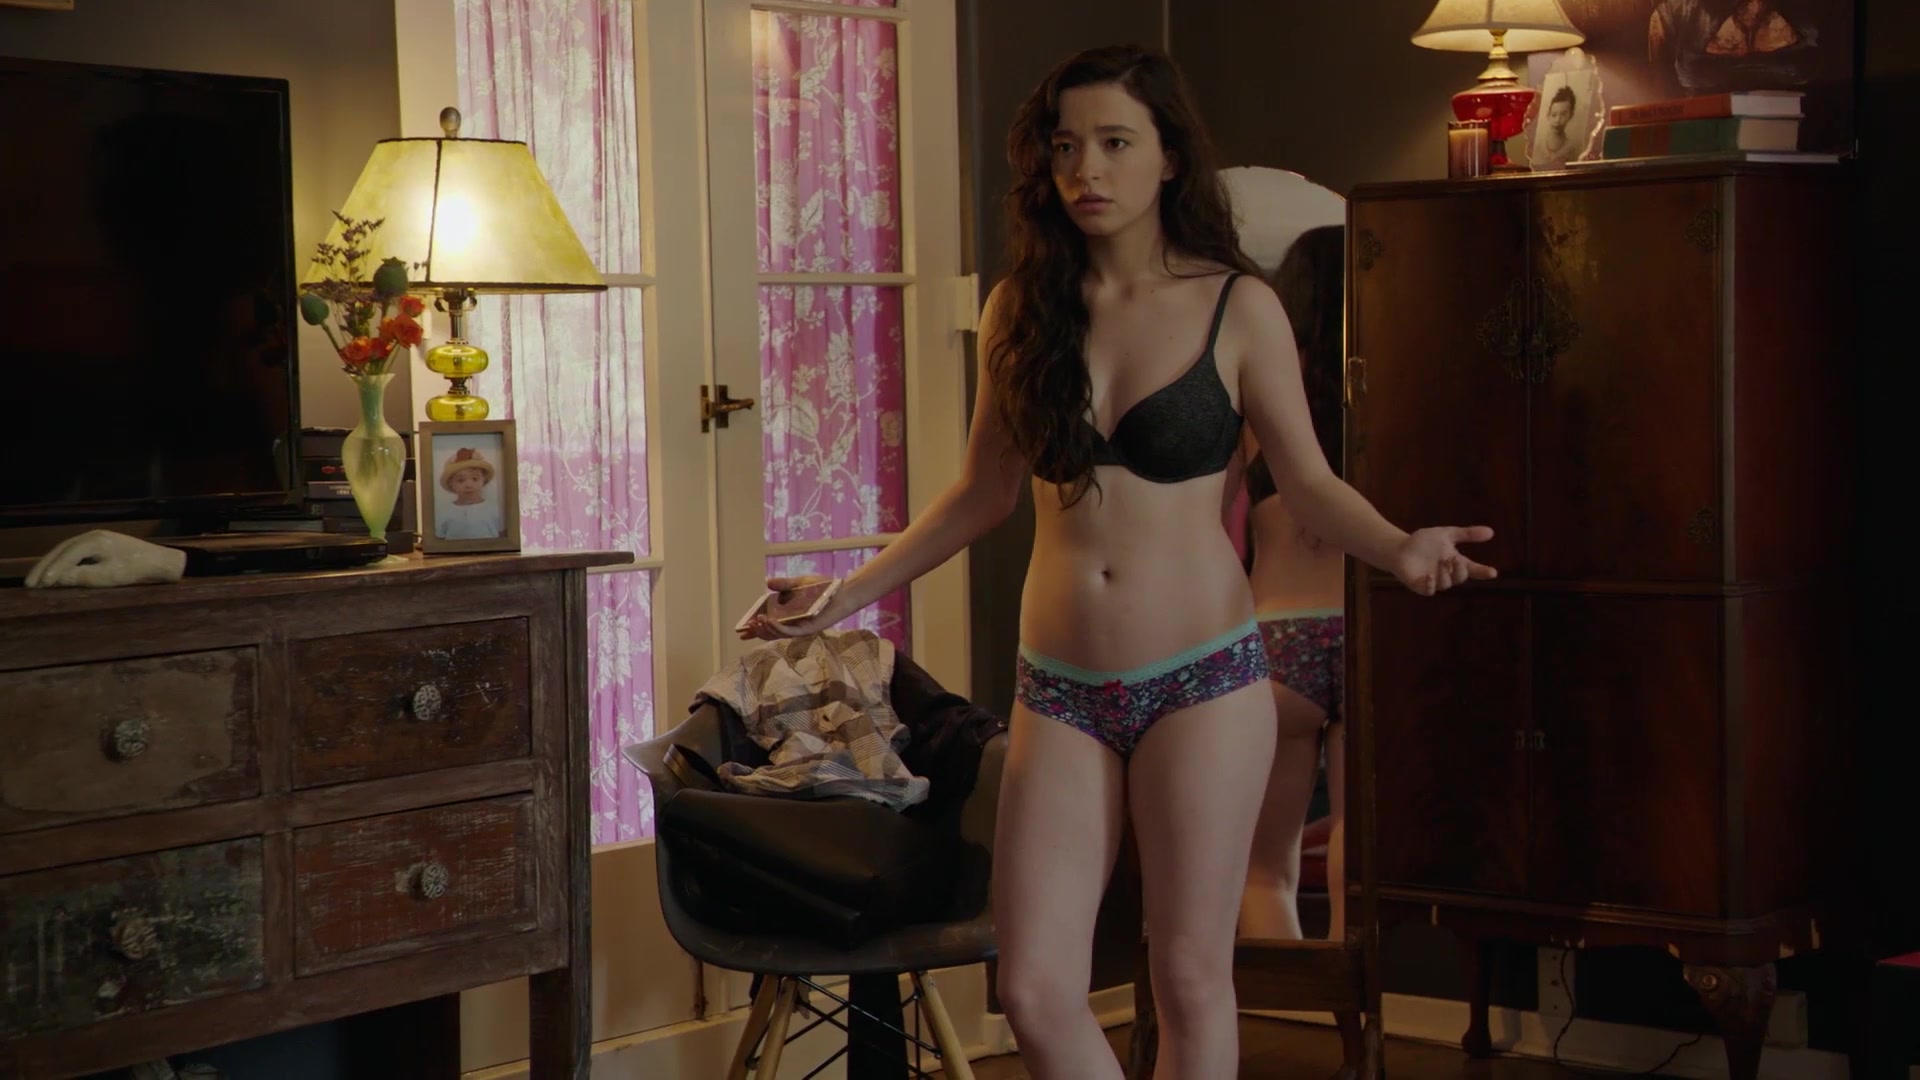 Mikey Madison nude - Better Things (2017) (Season 2, Episode 3) .